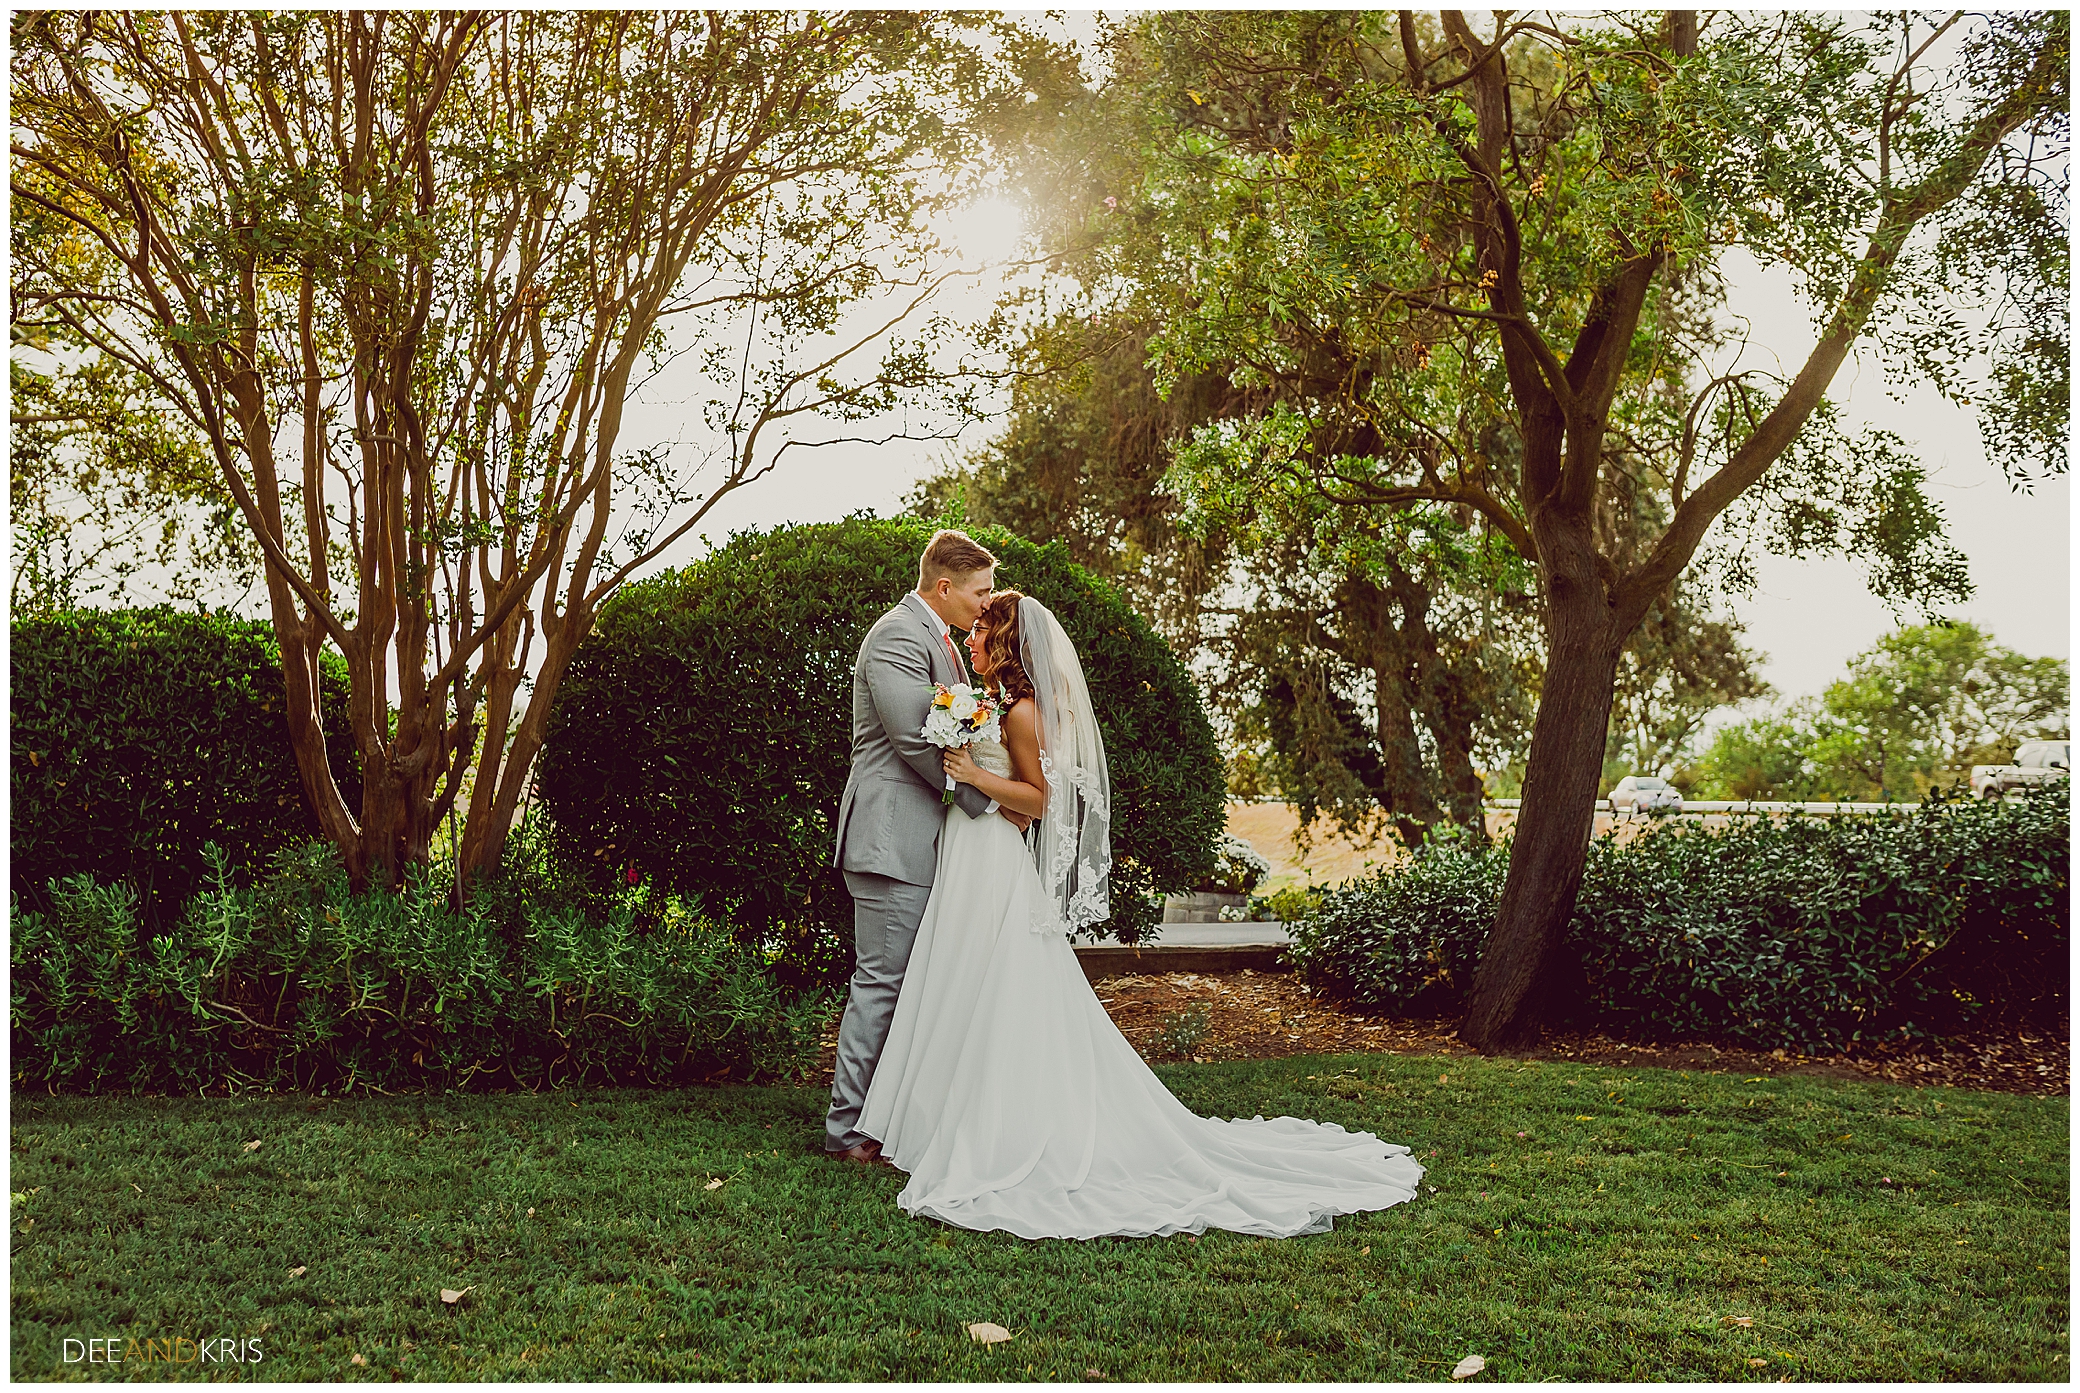 Romantic wedding picture at Scribner Bend's lush green venue